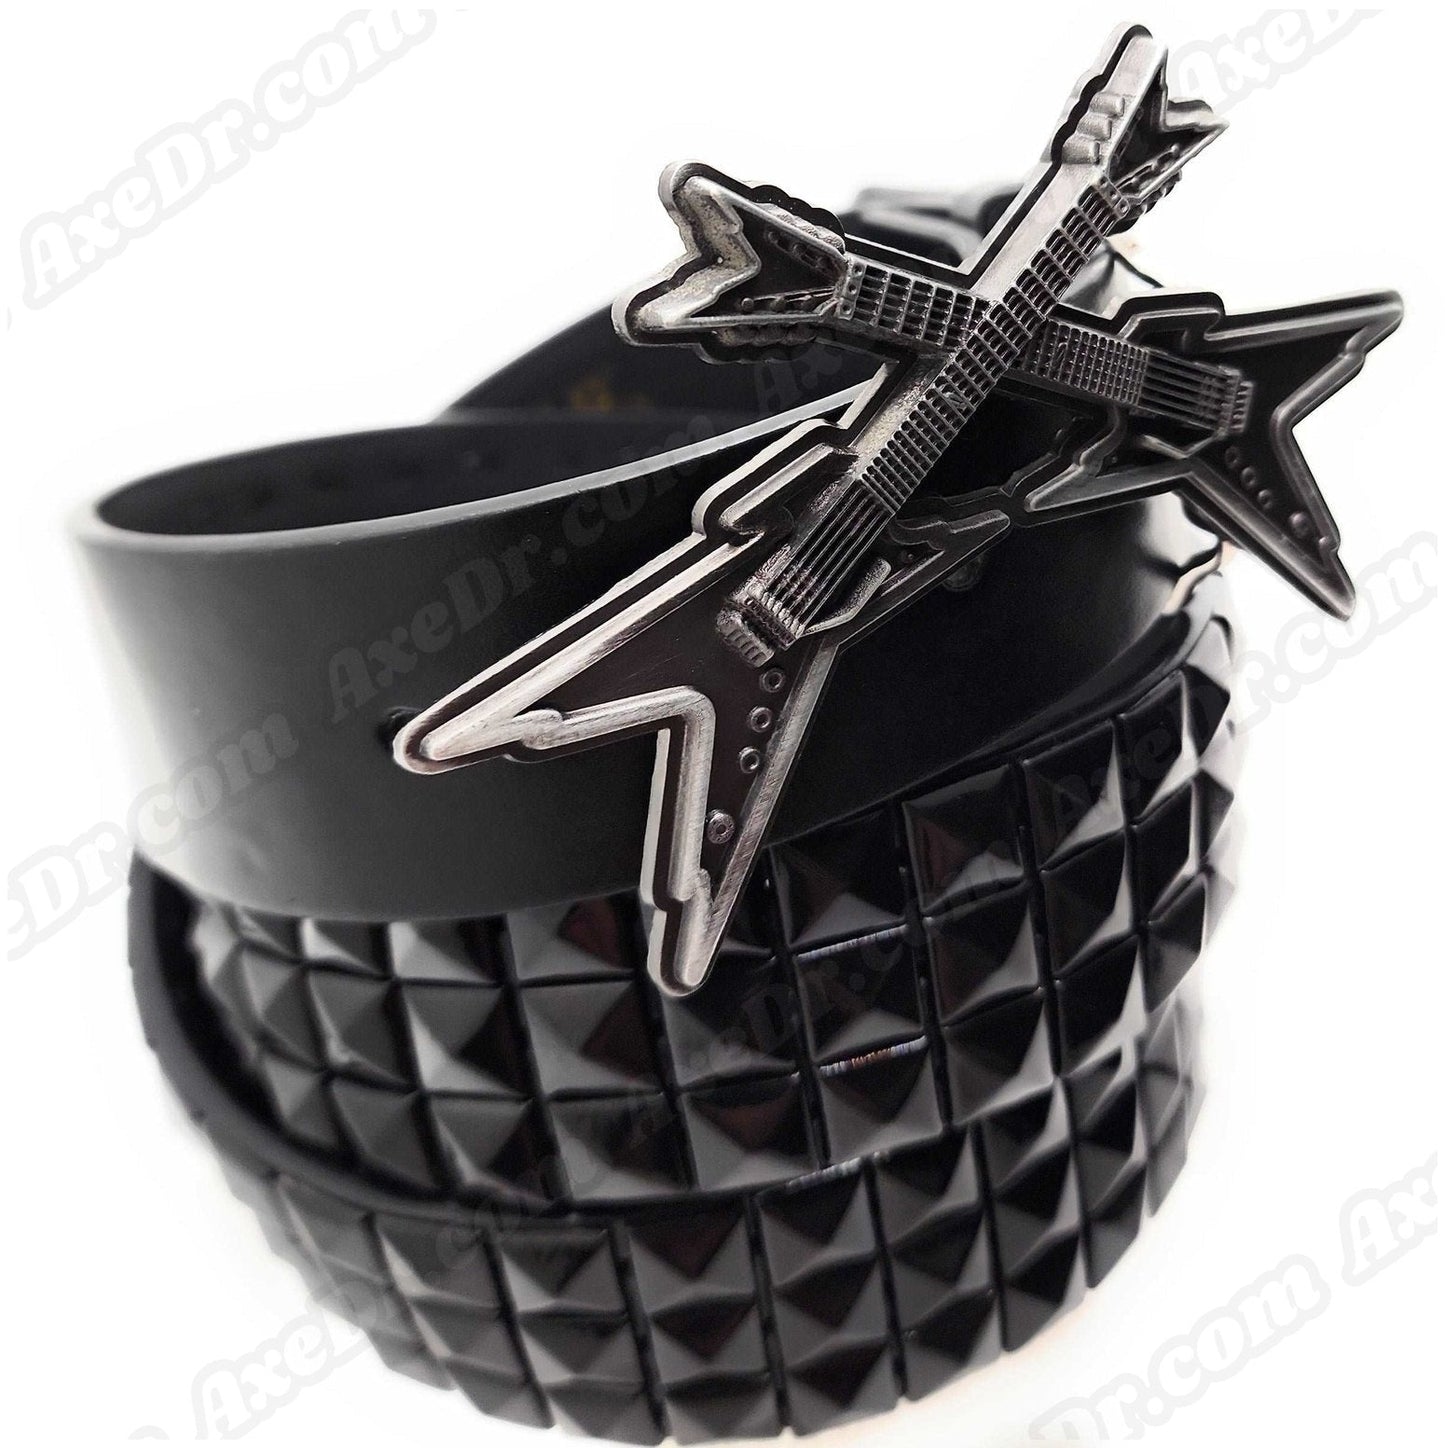 Crossed Axes Belt Buckle and Pyramid Studded Belt shop.AxeDr.com Belt Buckle, Belt with Buckle, Buckles with Belt, Genuine Leather, Gift for Him, guitar, Guitar Belt